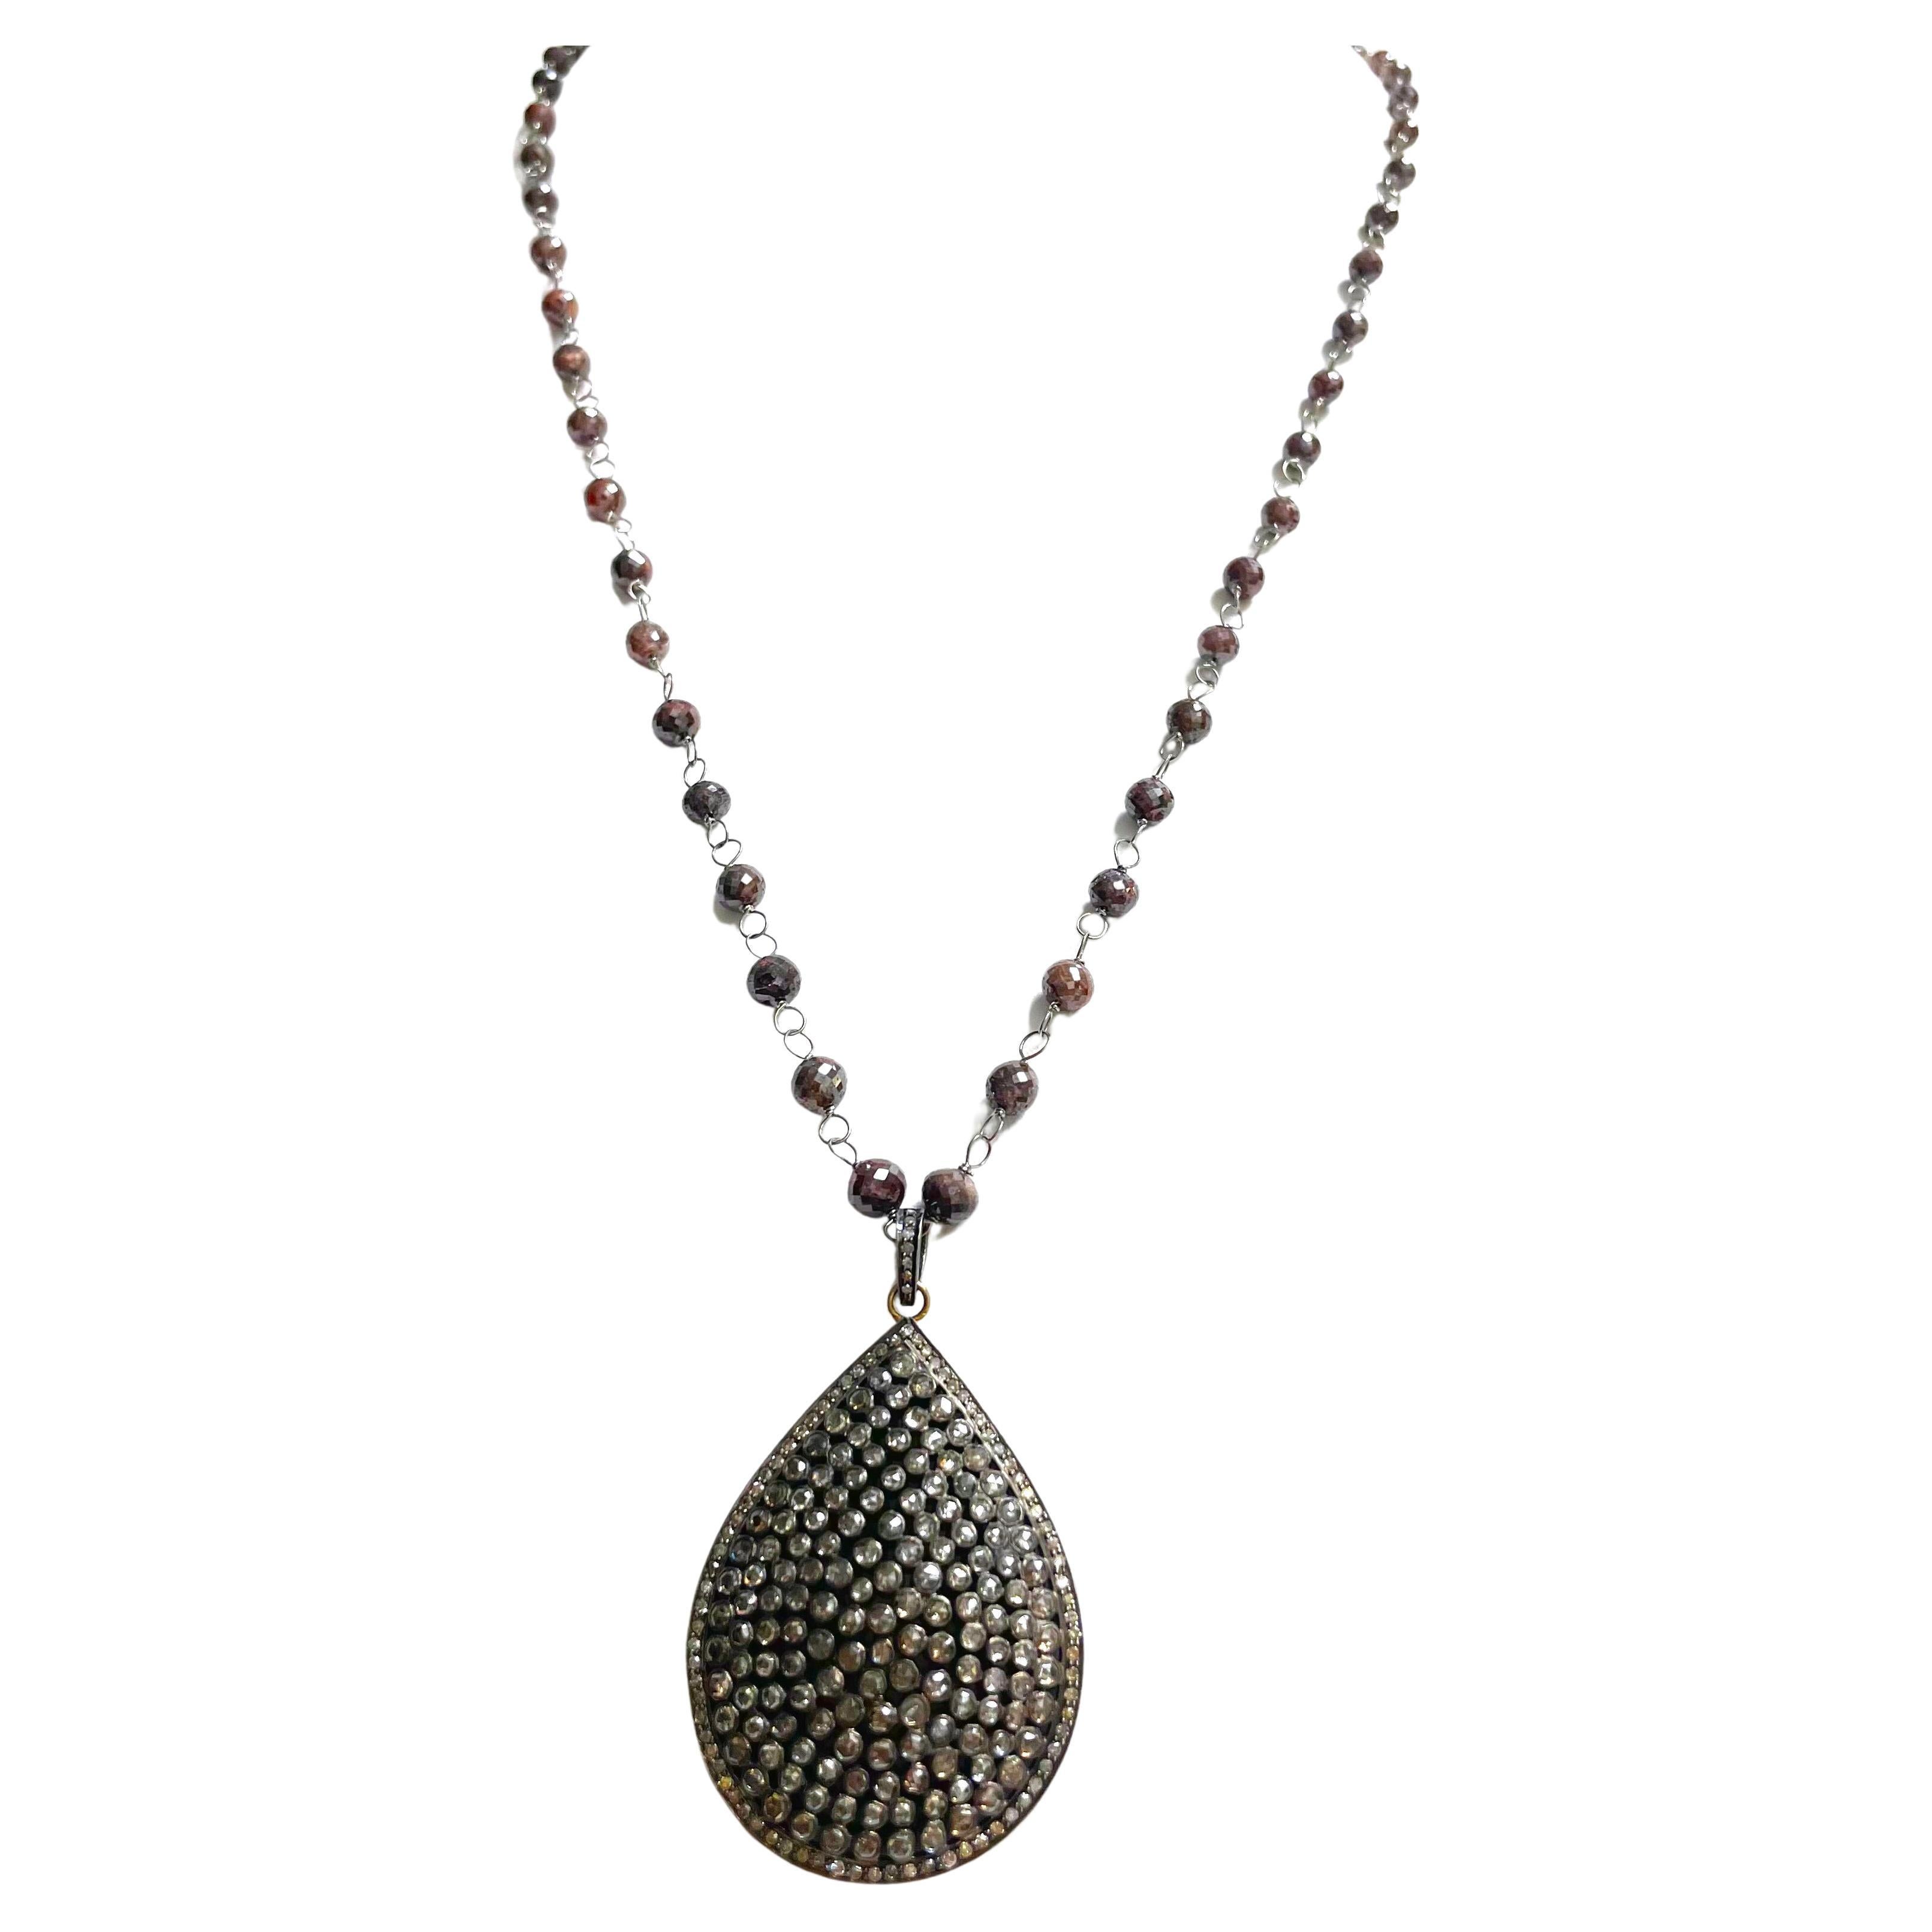 70 Carats Brown Diamonds with 7 Carats Champagne Diamonds Pendant Necklace For Sale 4